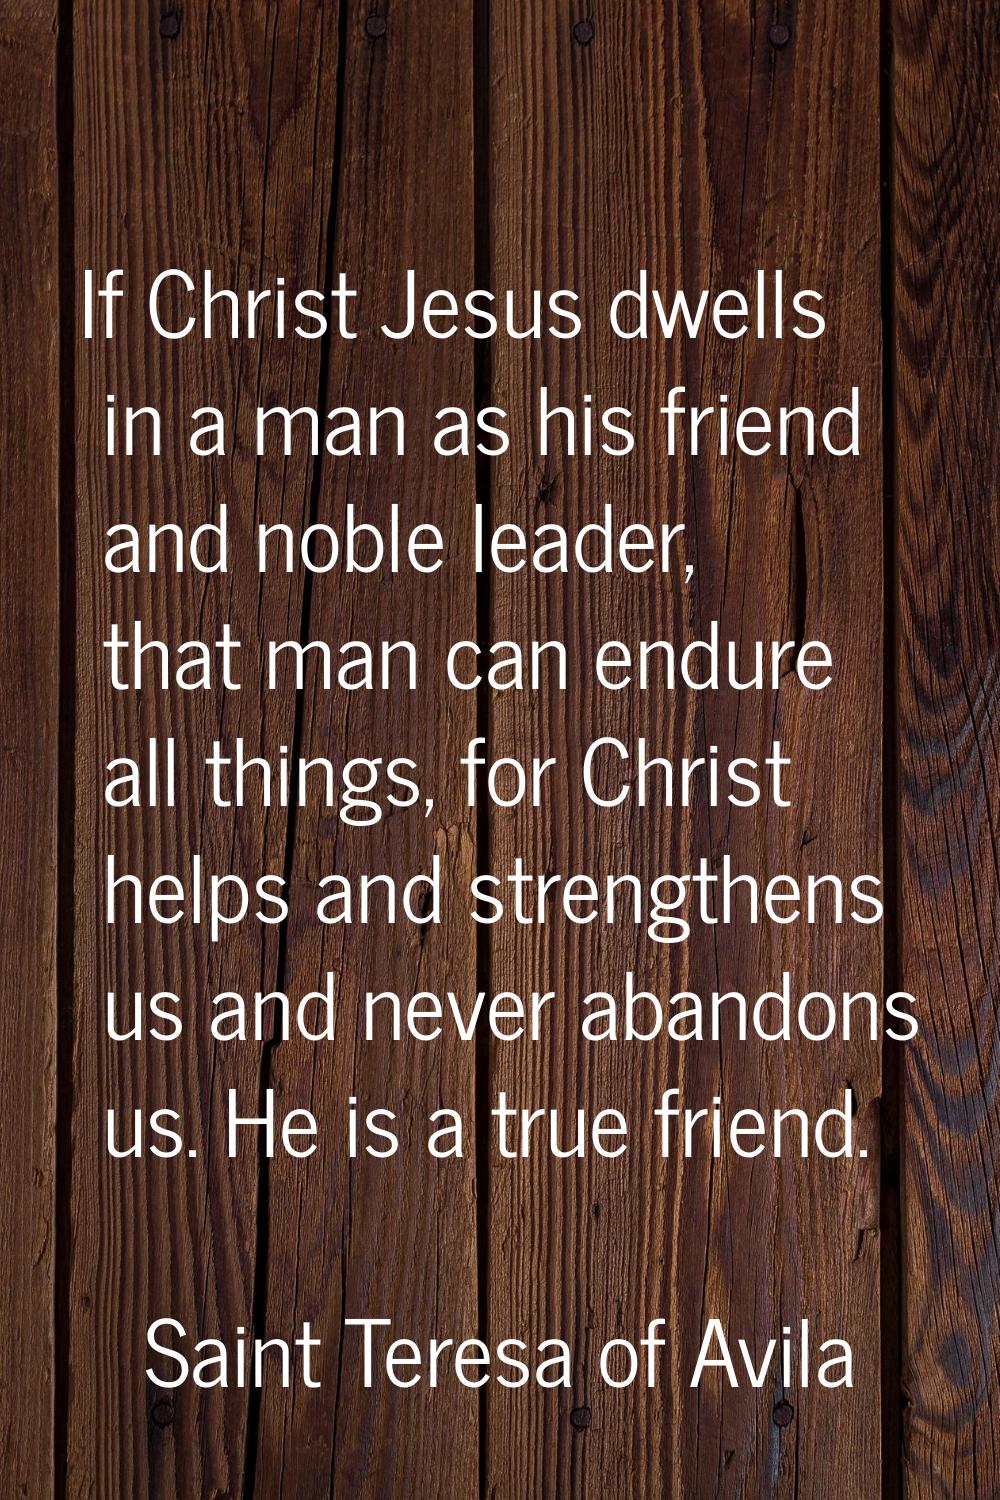 If Christ Jesus dwells in a man as his friend and noble leader, that man can endure all things, for